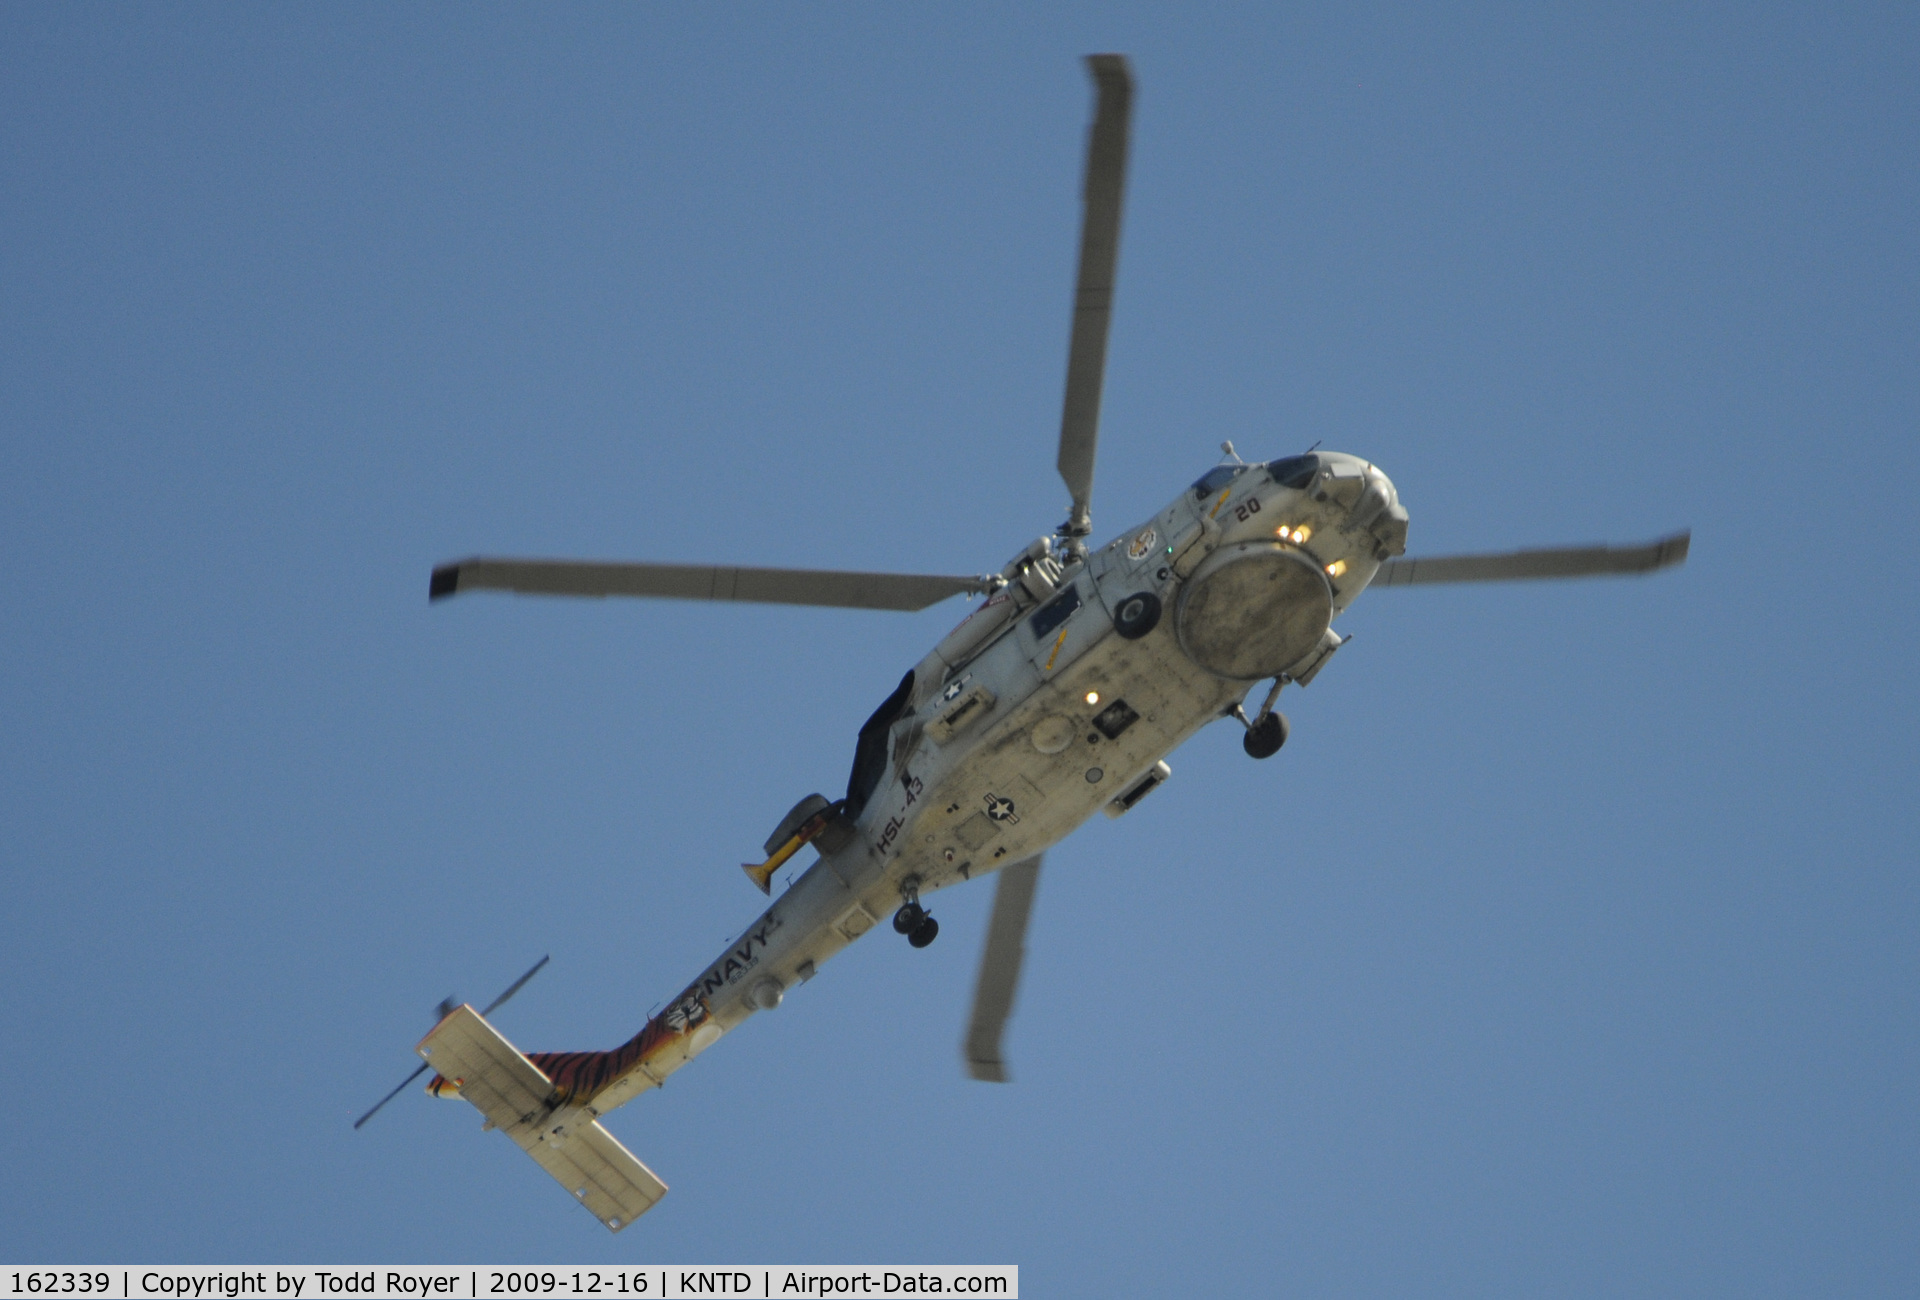 162339, Sikorsky SH-60B Seahawk C/N Not found 162339, From the backyard